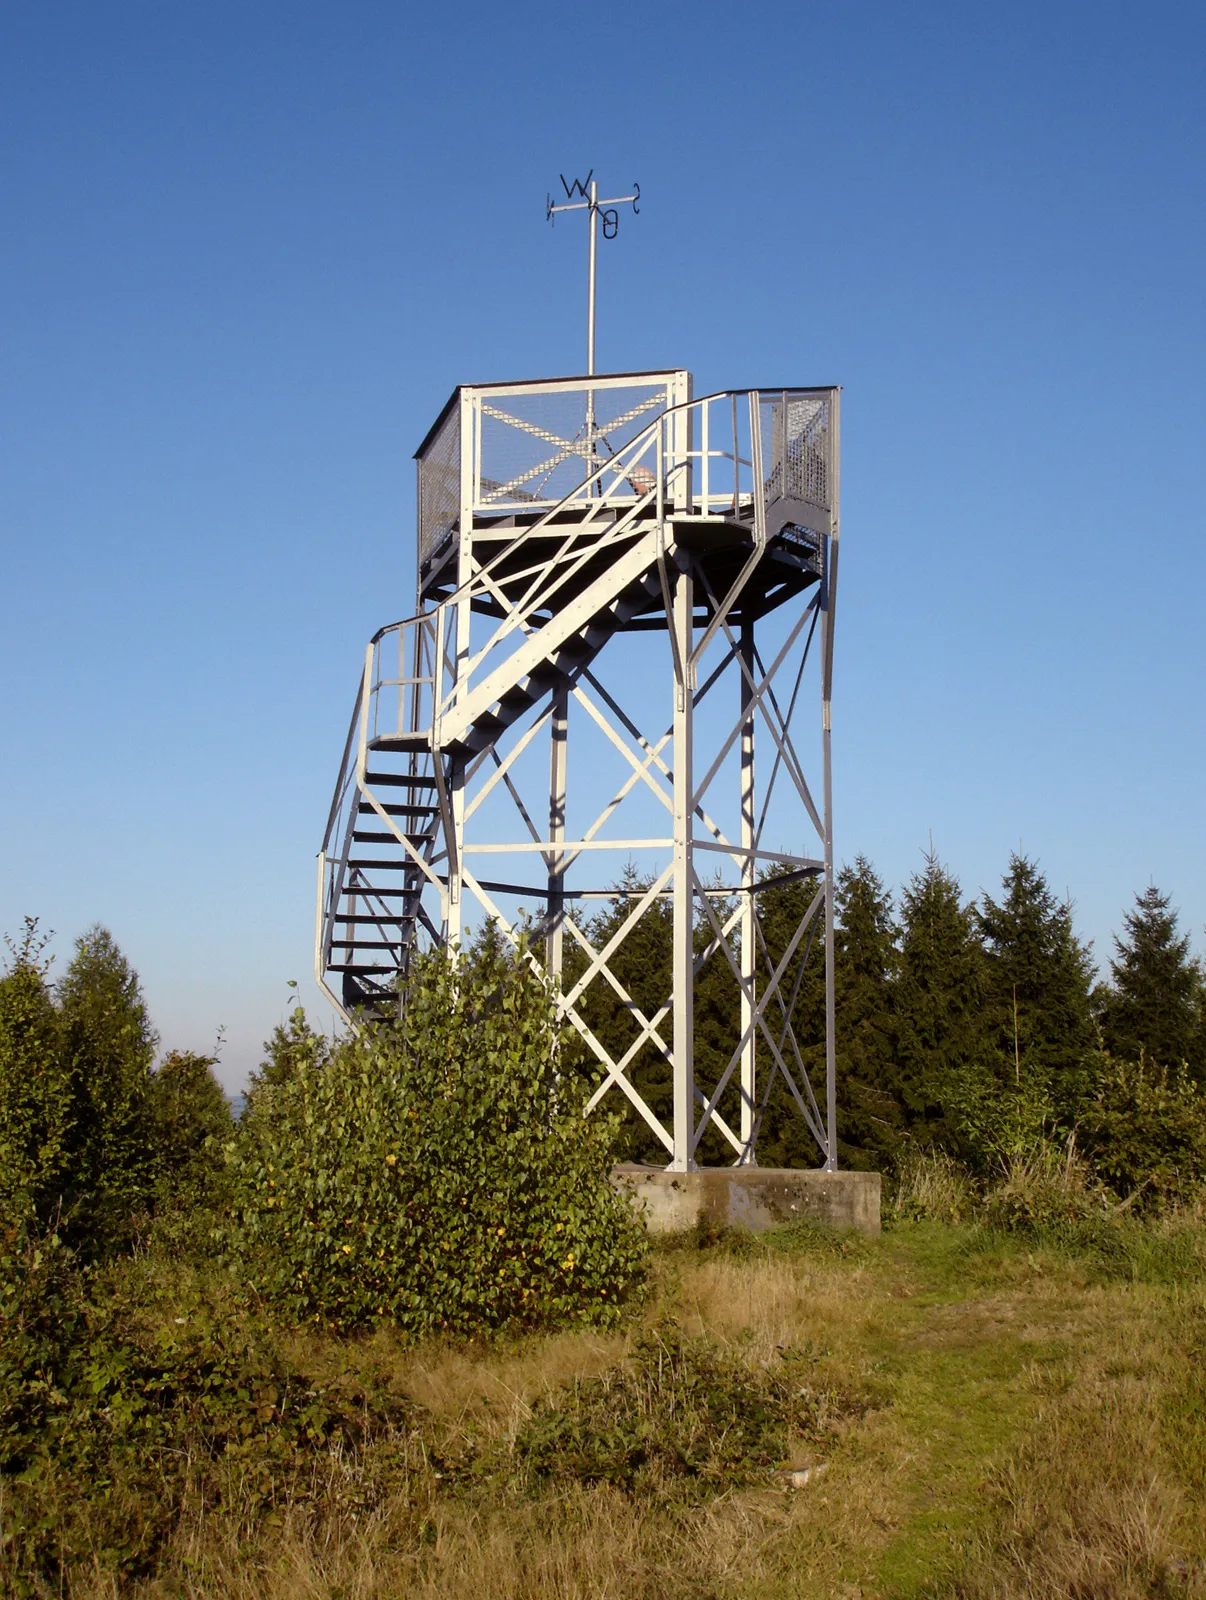 Photo showing: Peak of the mountain Gilberg (known as Gilbergskopf, 425.93 m ASL) with its observation tower in Siegen, Germany. The truss tower has a height of 5.56 m and was erected in 1888 on order by the Heimat- und Verschönerungsverein Eiserfeld. It is the oldest among the four observation towers in Siegen. View from the tower: See Image:Siegen Blick aus Sueden Sued-West.jpg.